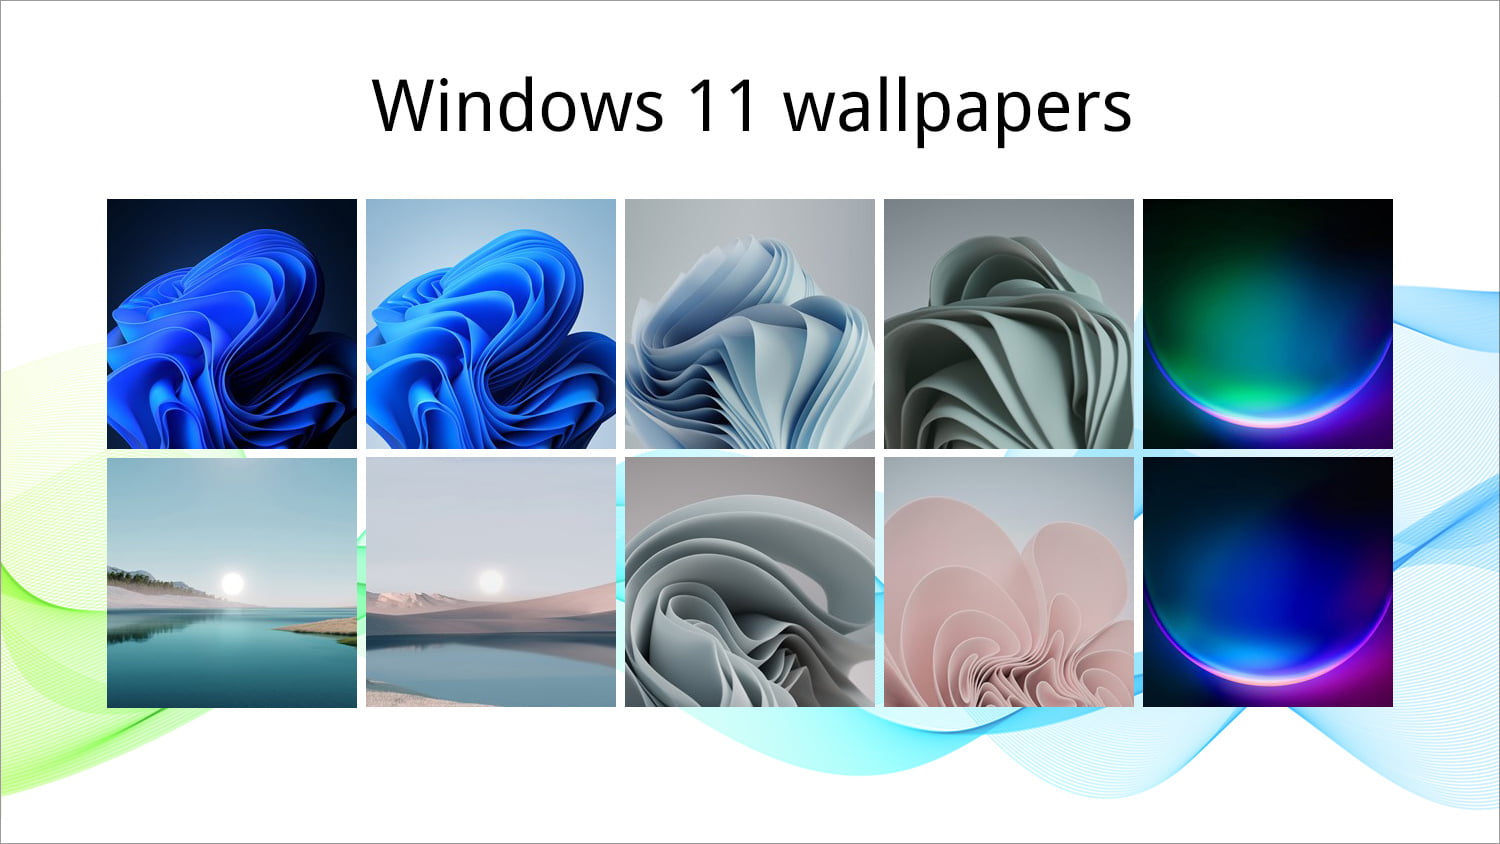 Windows 11 official stock wallpaper download here